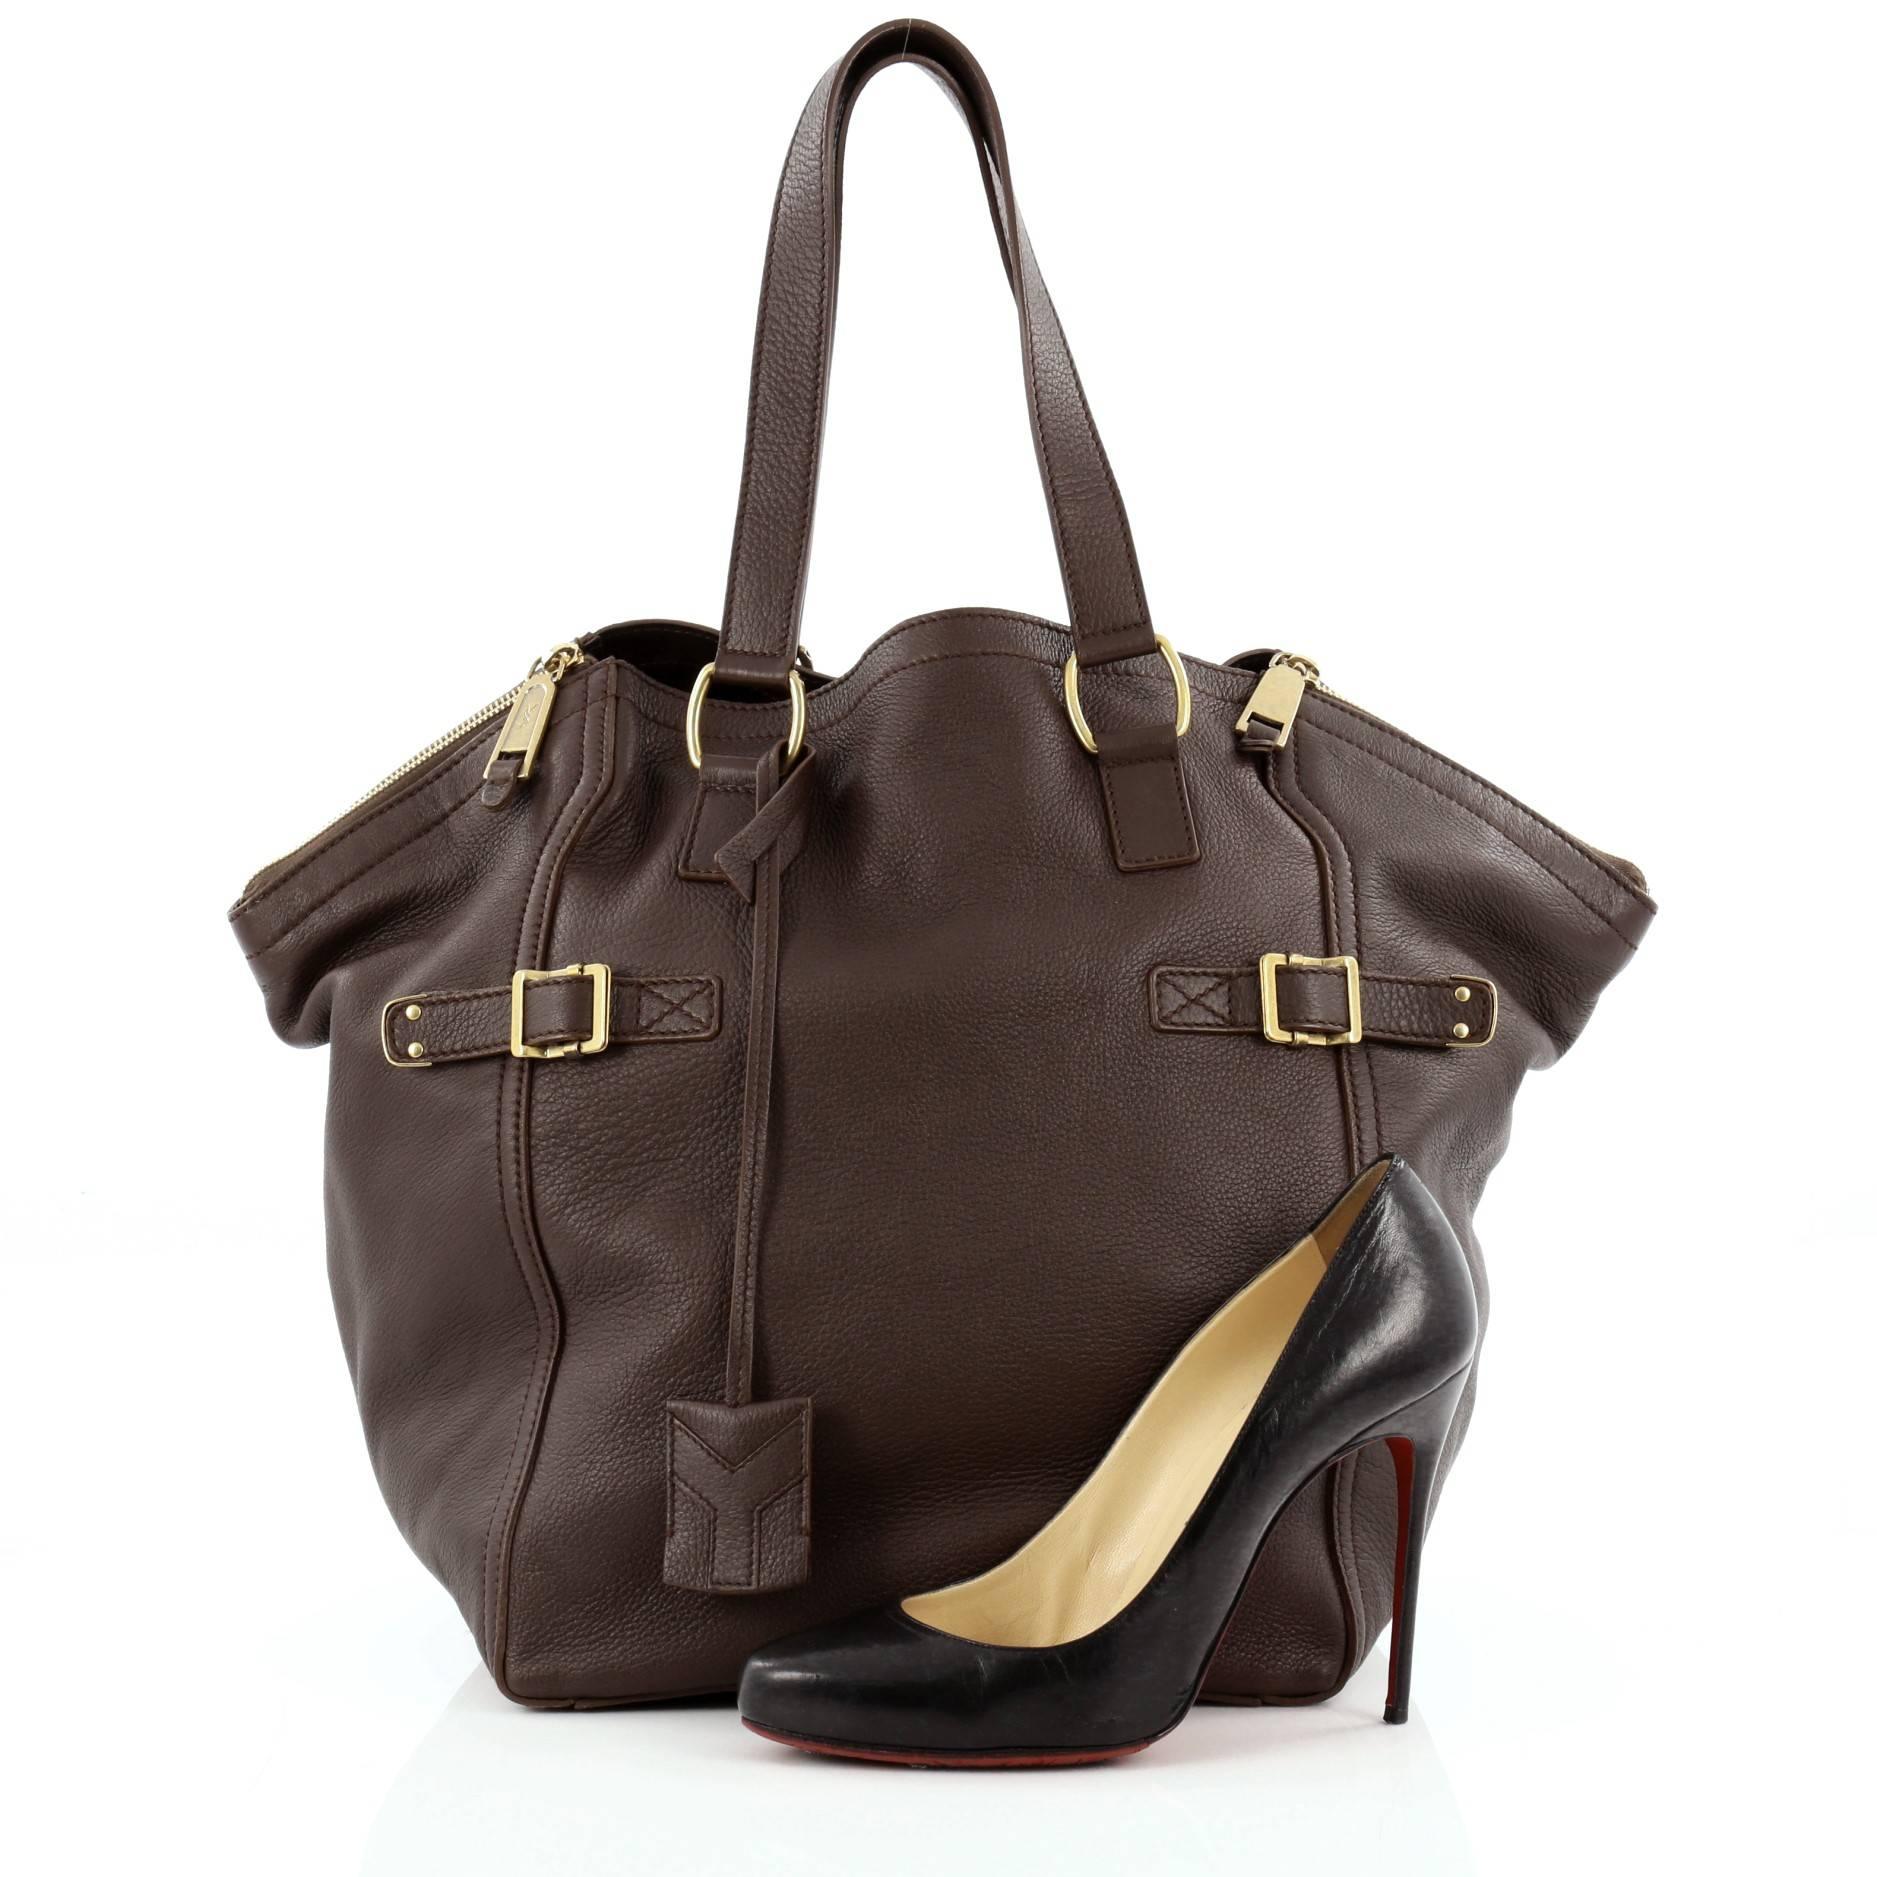 This authentic Saint Laurent Downtown Tote Leather Medium is a simple, daily tote made for the modern woman. Constructed in brown leather, this tote features dual tall straps, buckle detailing, front zipped pocket, protective base studs and